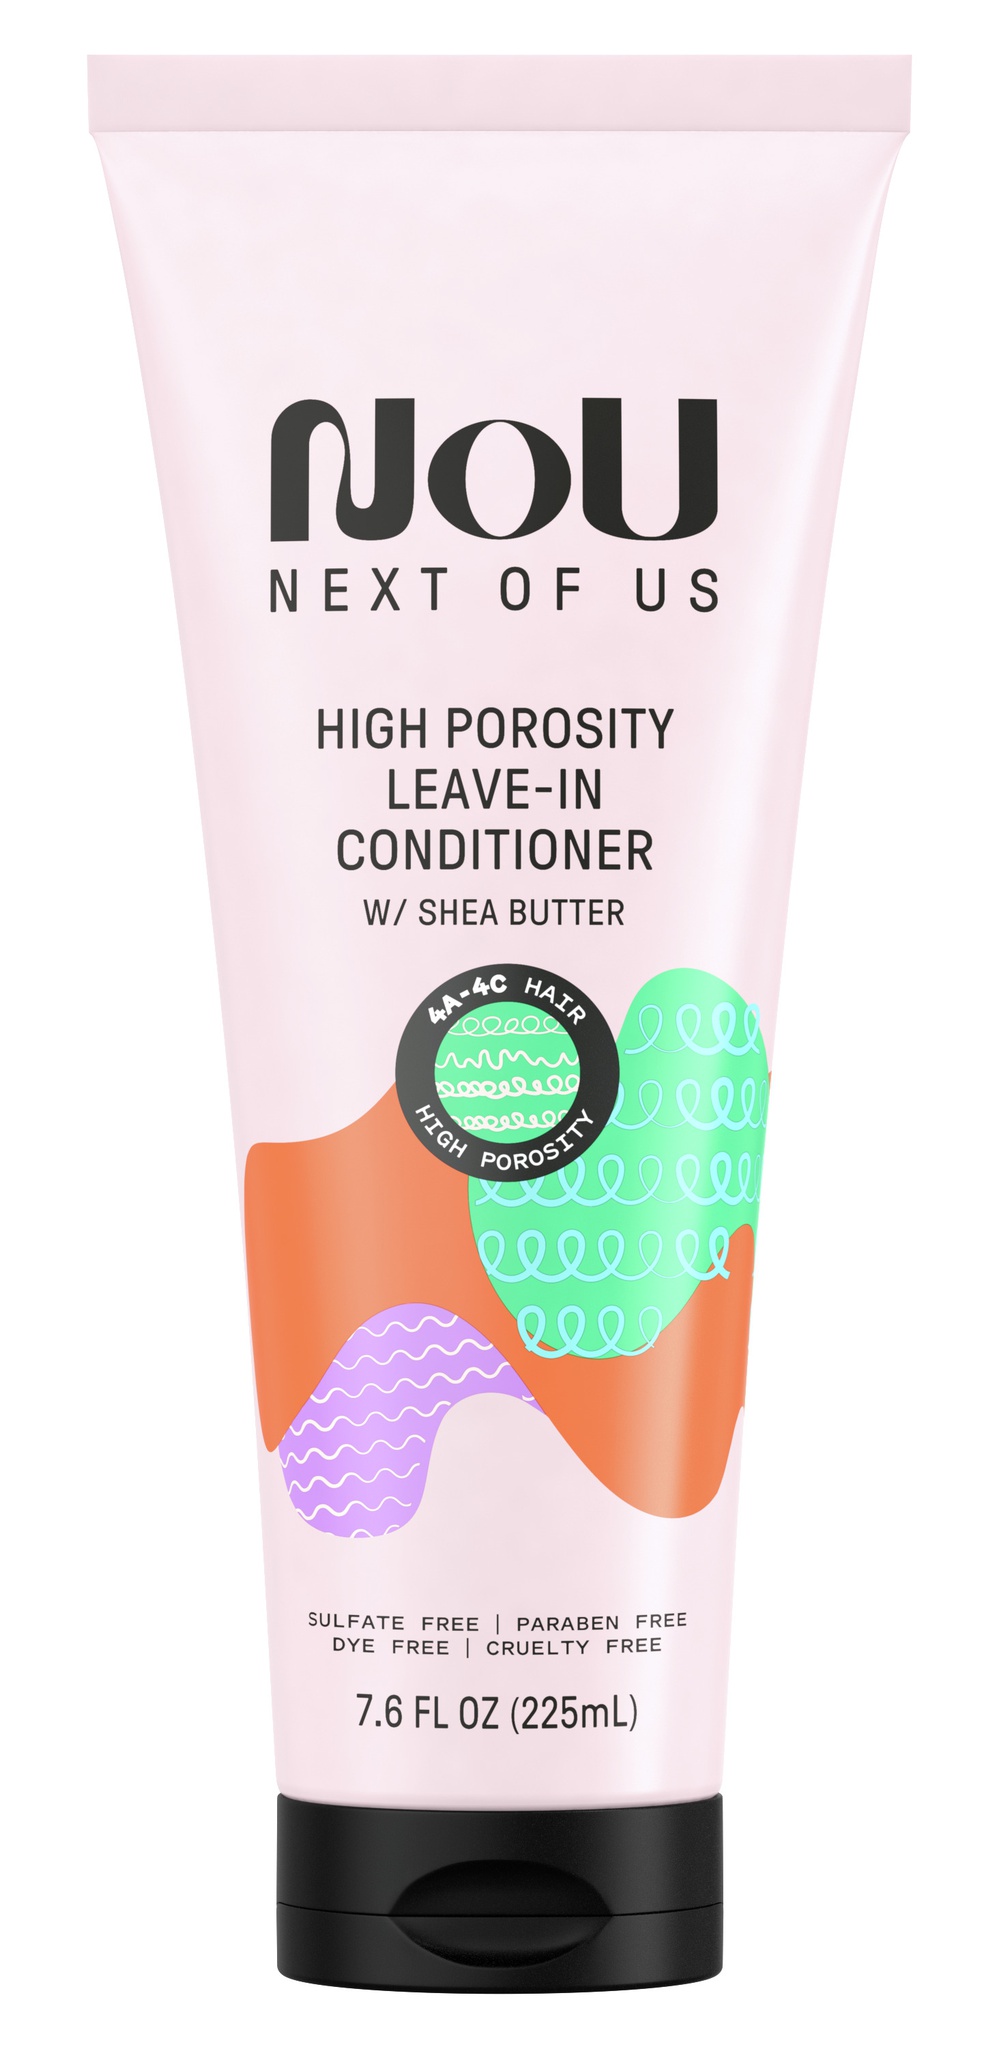 Next of Us High Porosity Leave In Conditioner